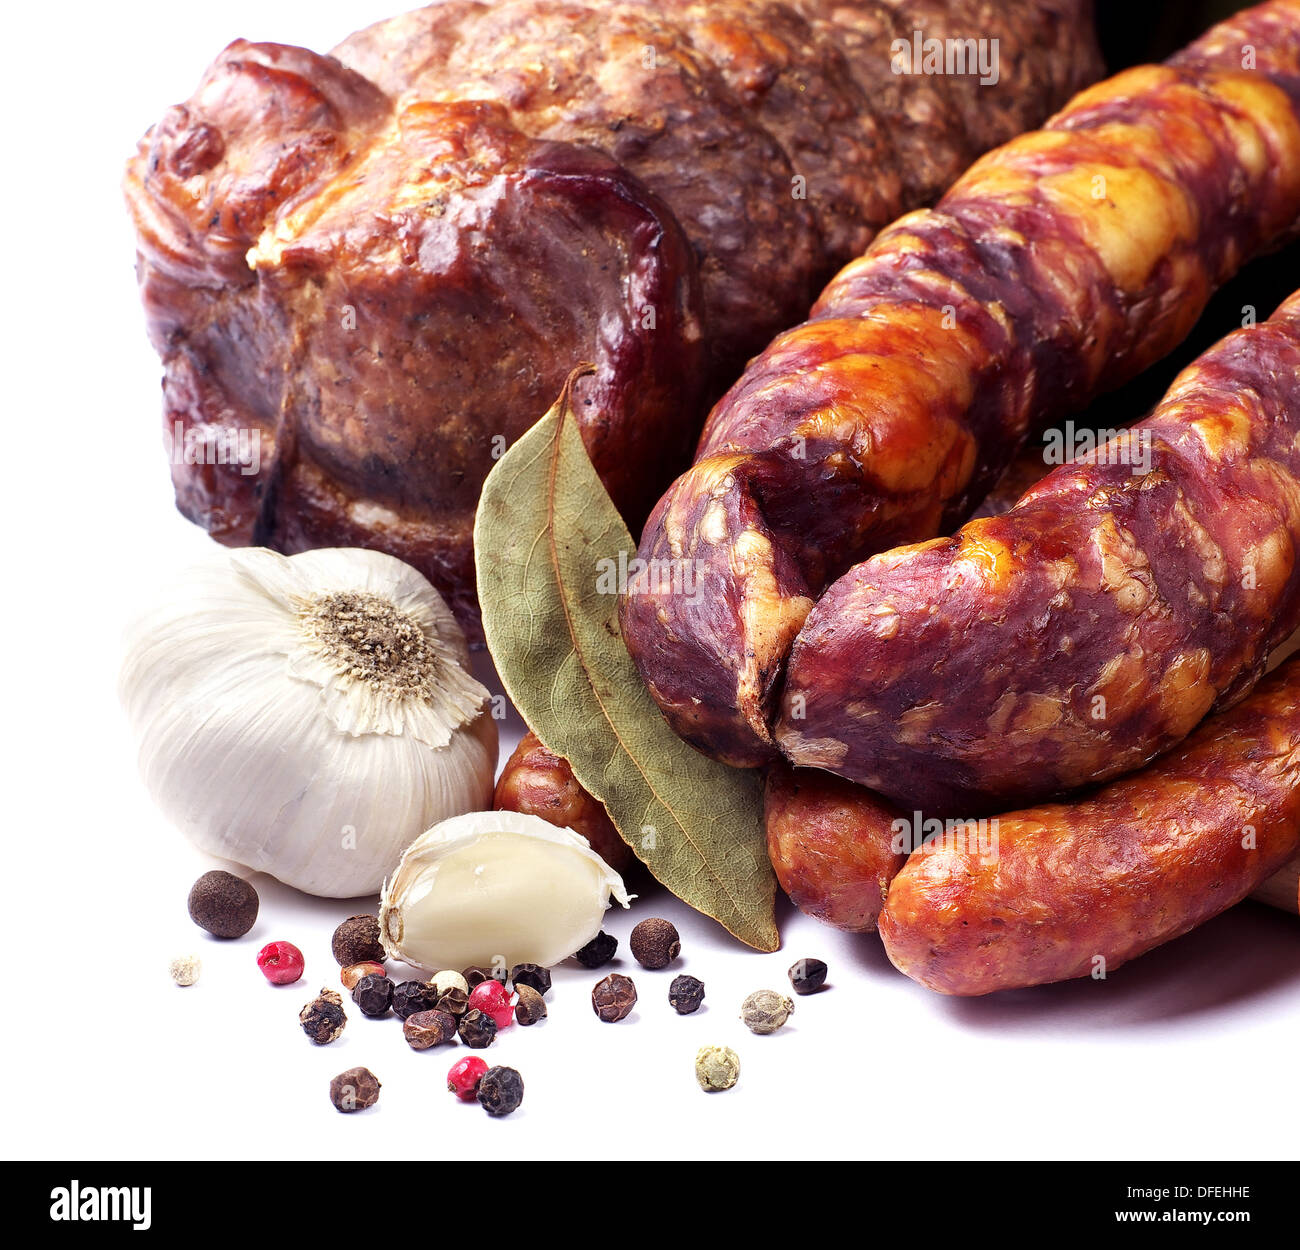 Smoked sausage and meat on white Stock Photo